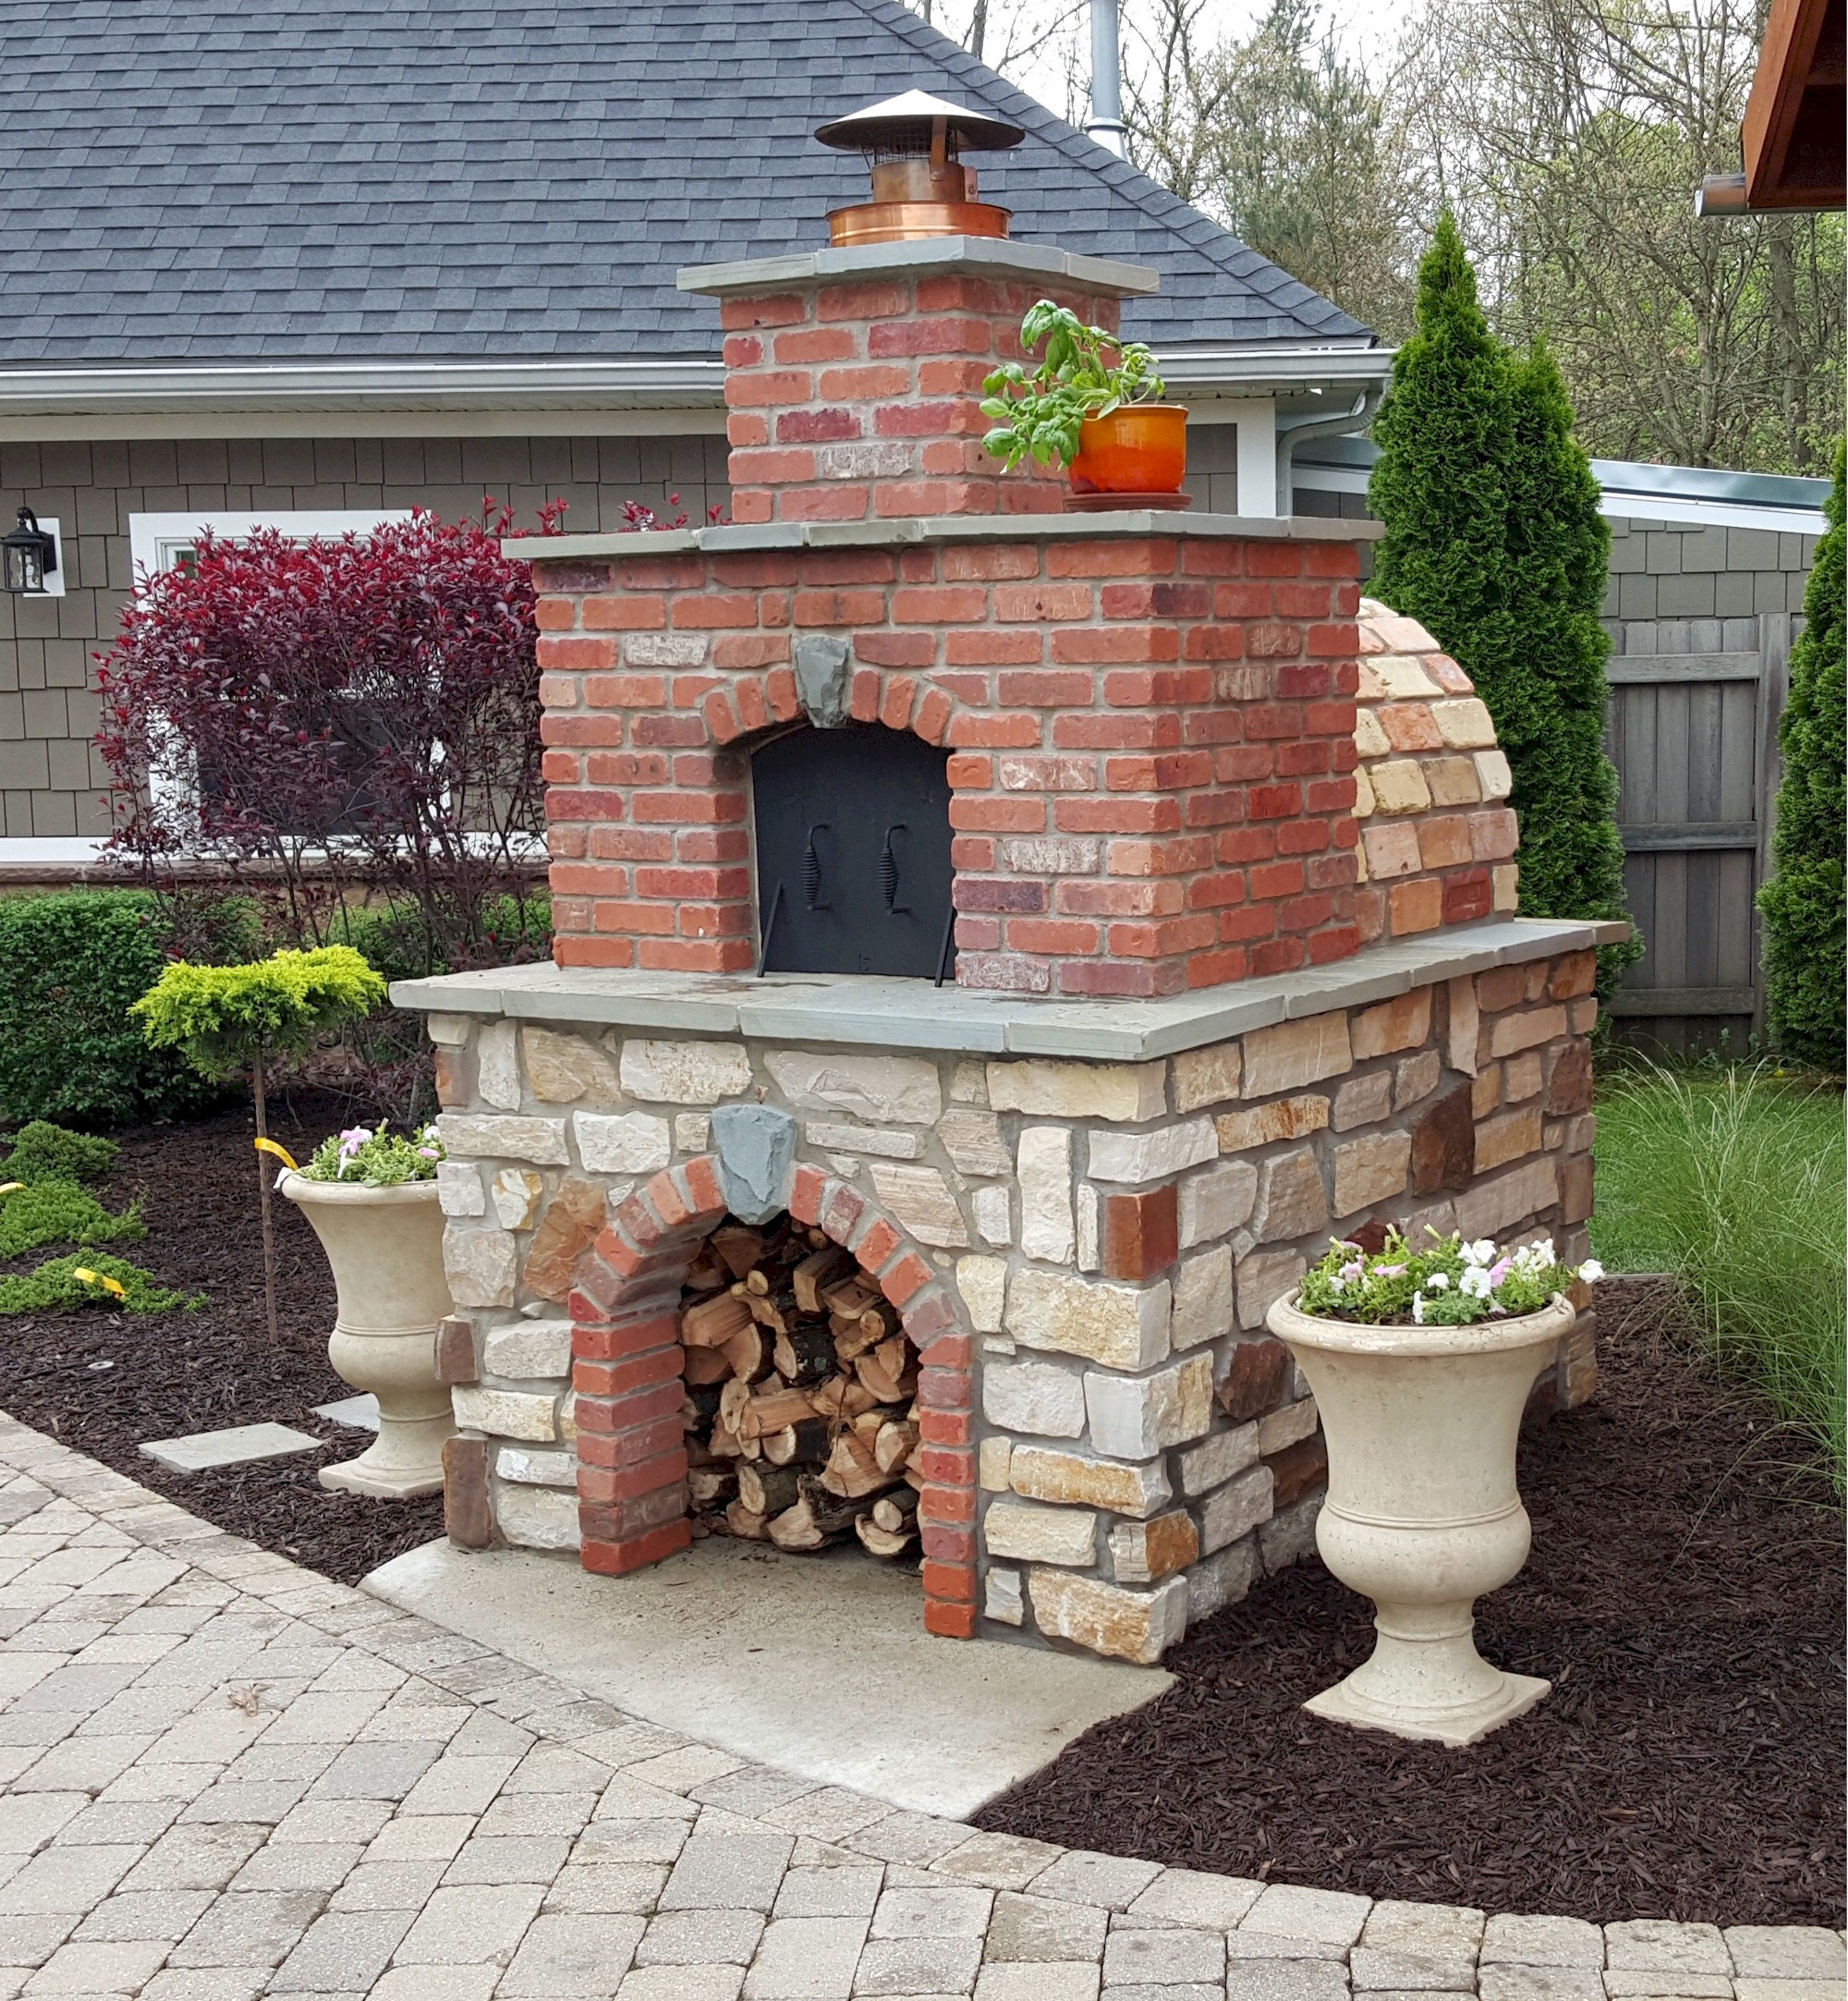 DIY Outdoor Pizza Oven
 DIY Wood Fired Outdoor Brick Pizza Ovens Are Not ly Easy